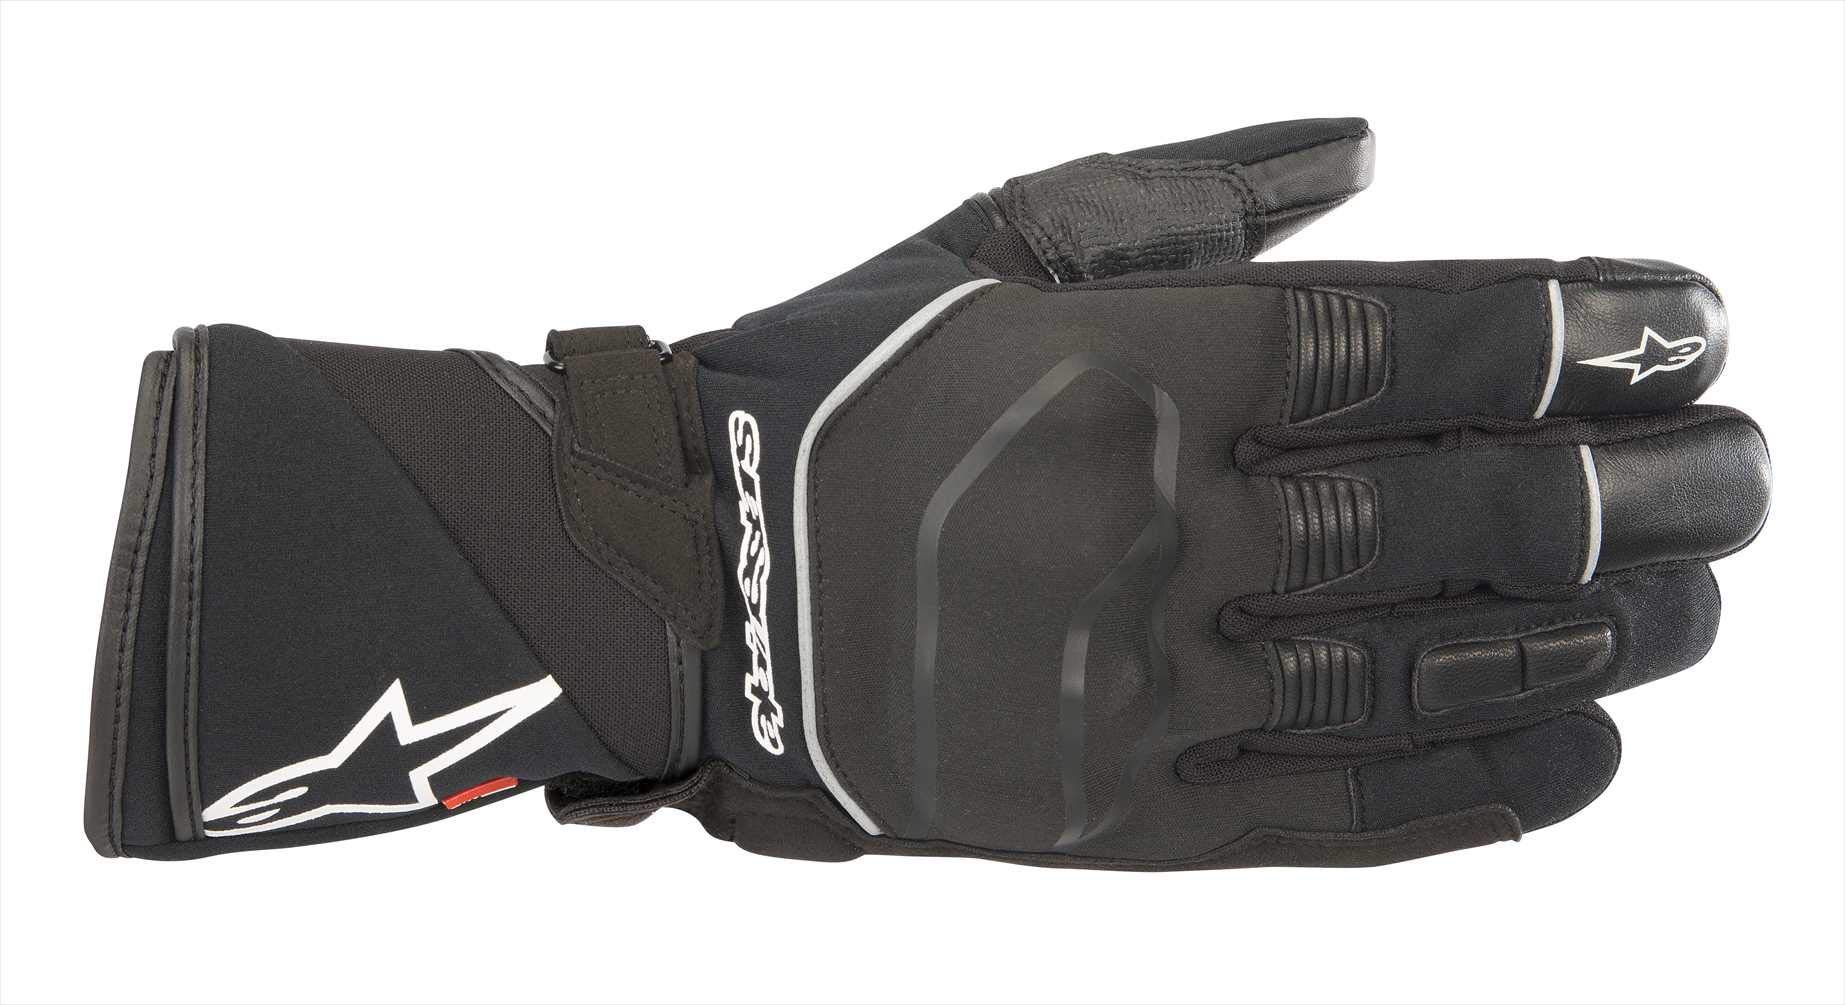 Alpinestars Men's Andes Touring Outdry Waterproof Motorcycle Riding Glove, Black, Small